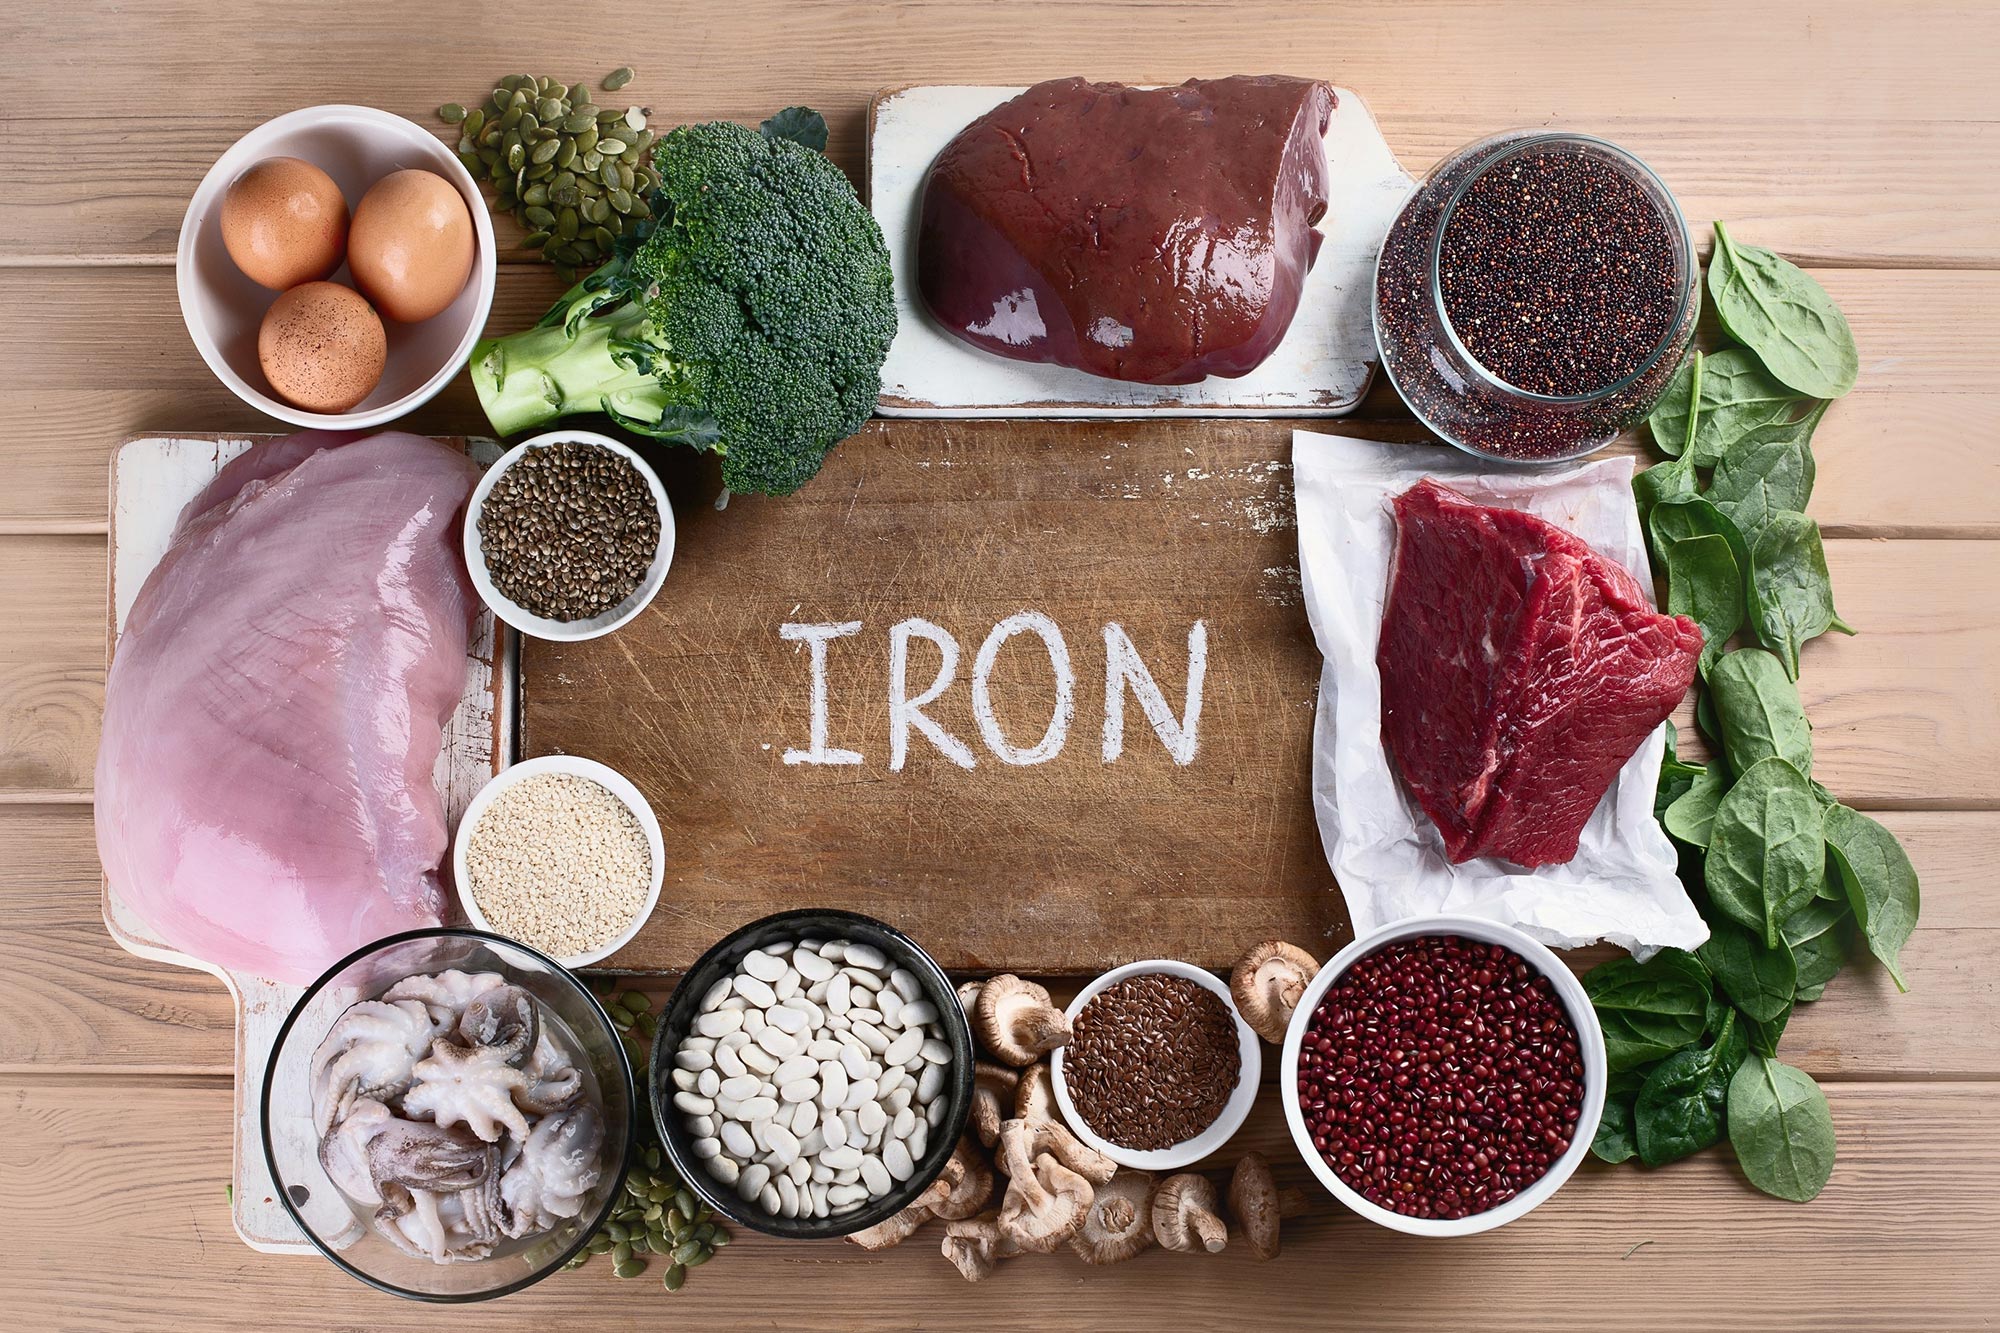 Food with iron kidney